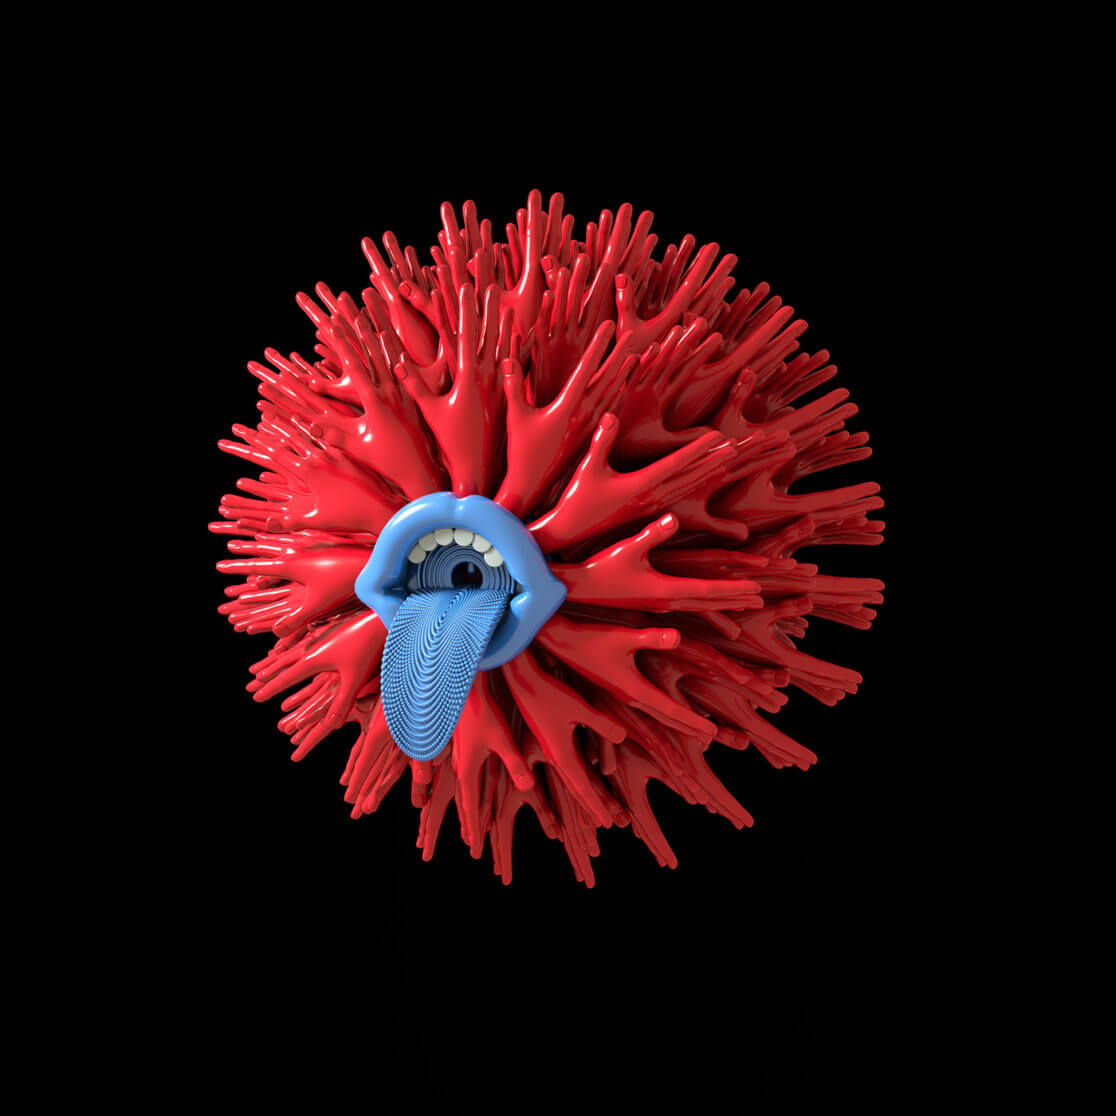 Artistic vinyl design of a red germ with blue mouth. SAE student work by designer Mitchell Viney